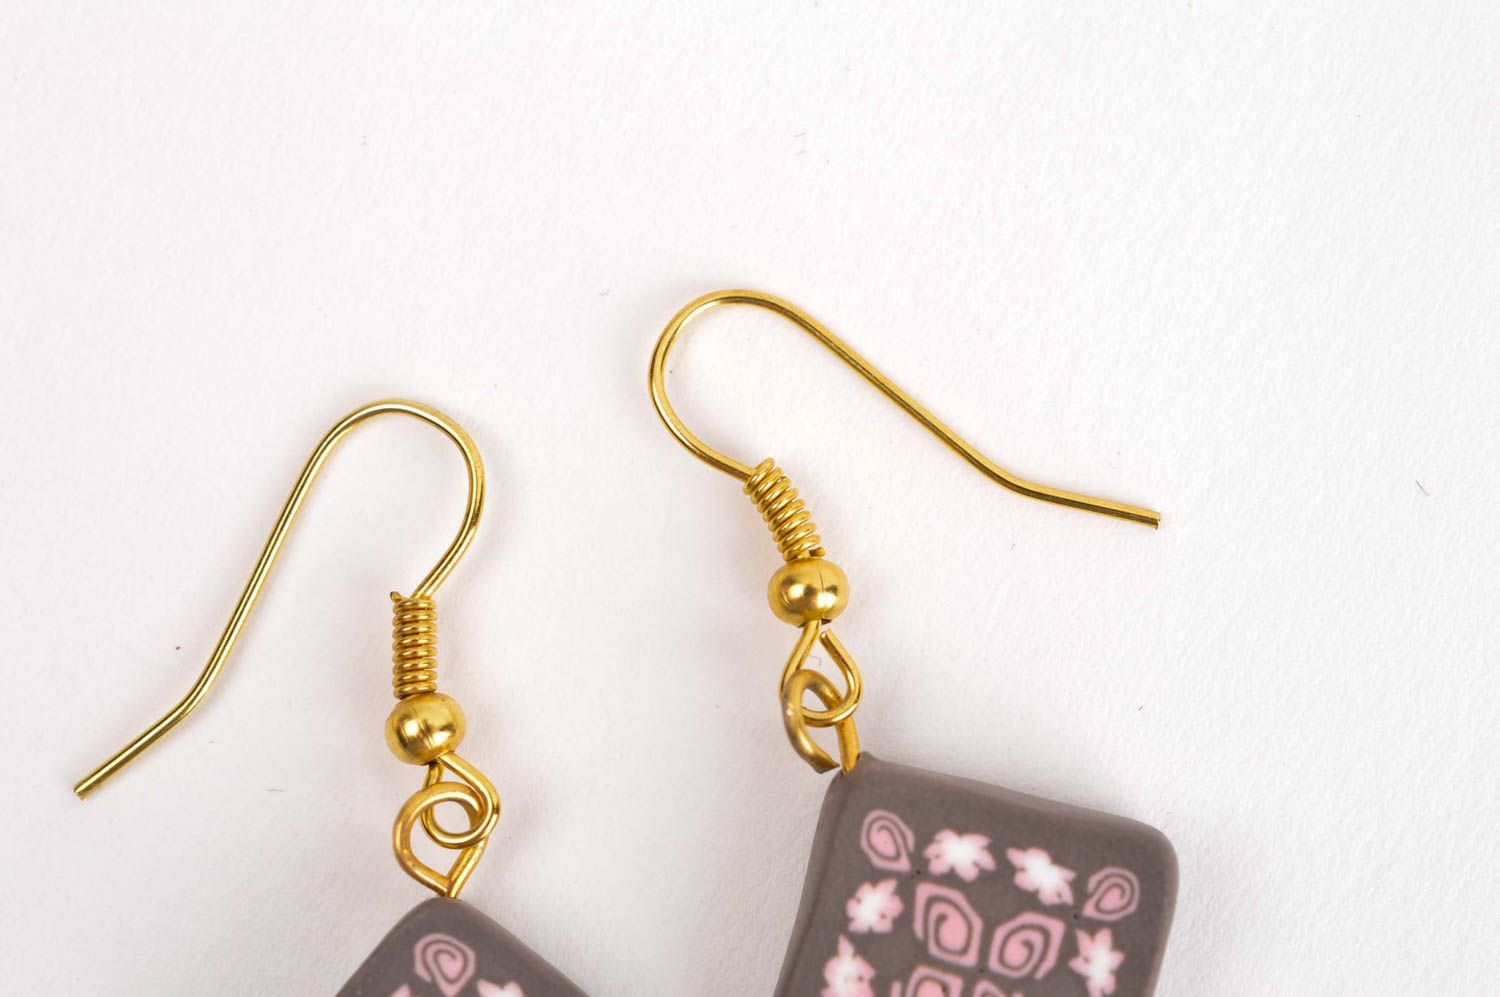 Handmade designer earrings jewelry made of clay stylish earrings with charms photo 4